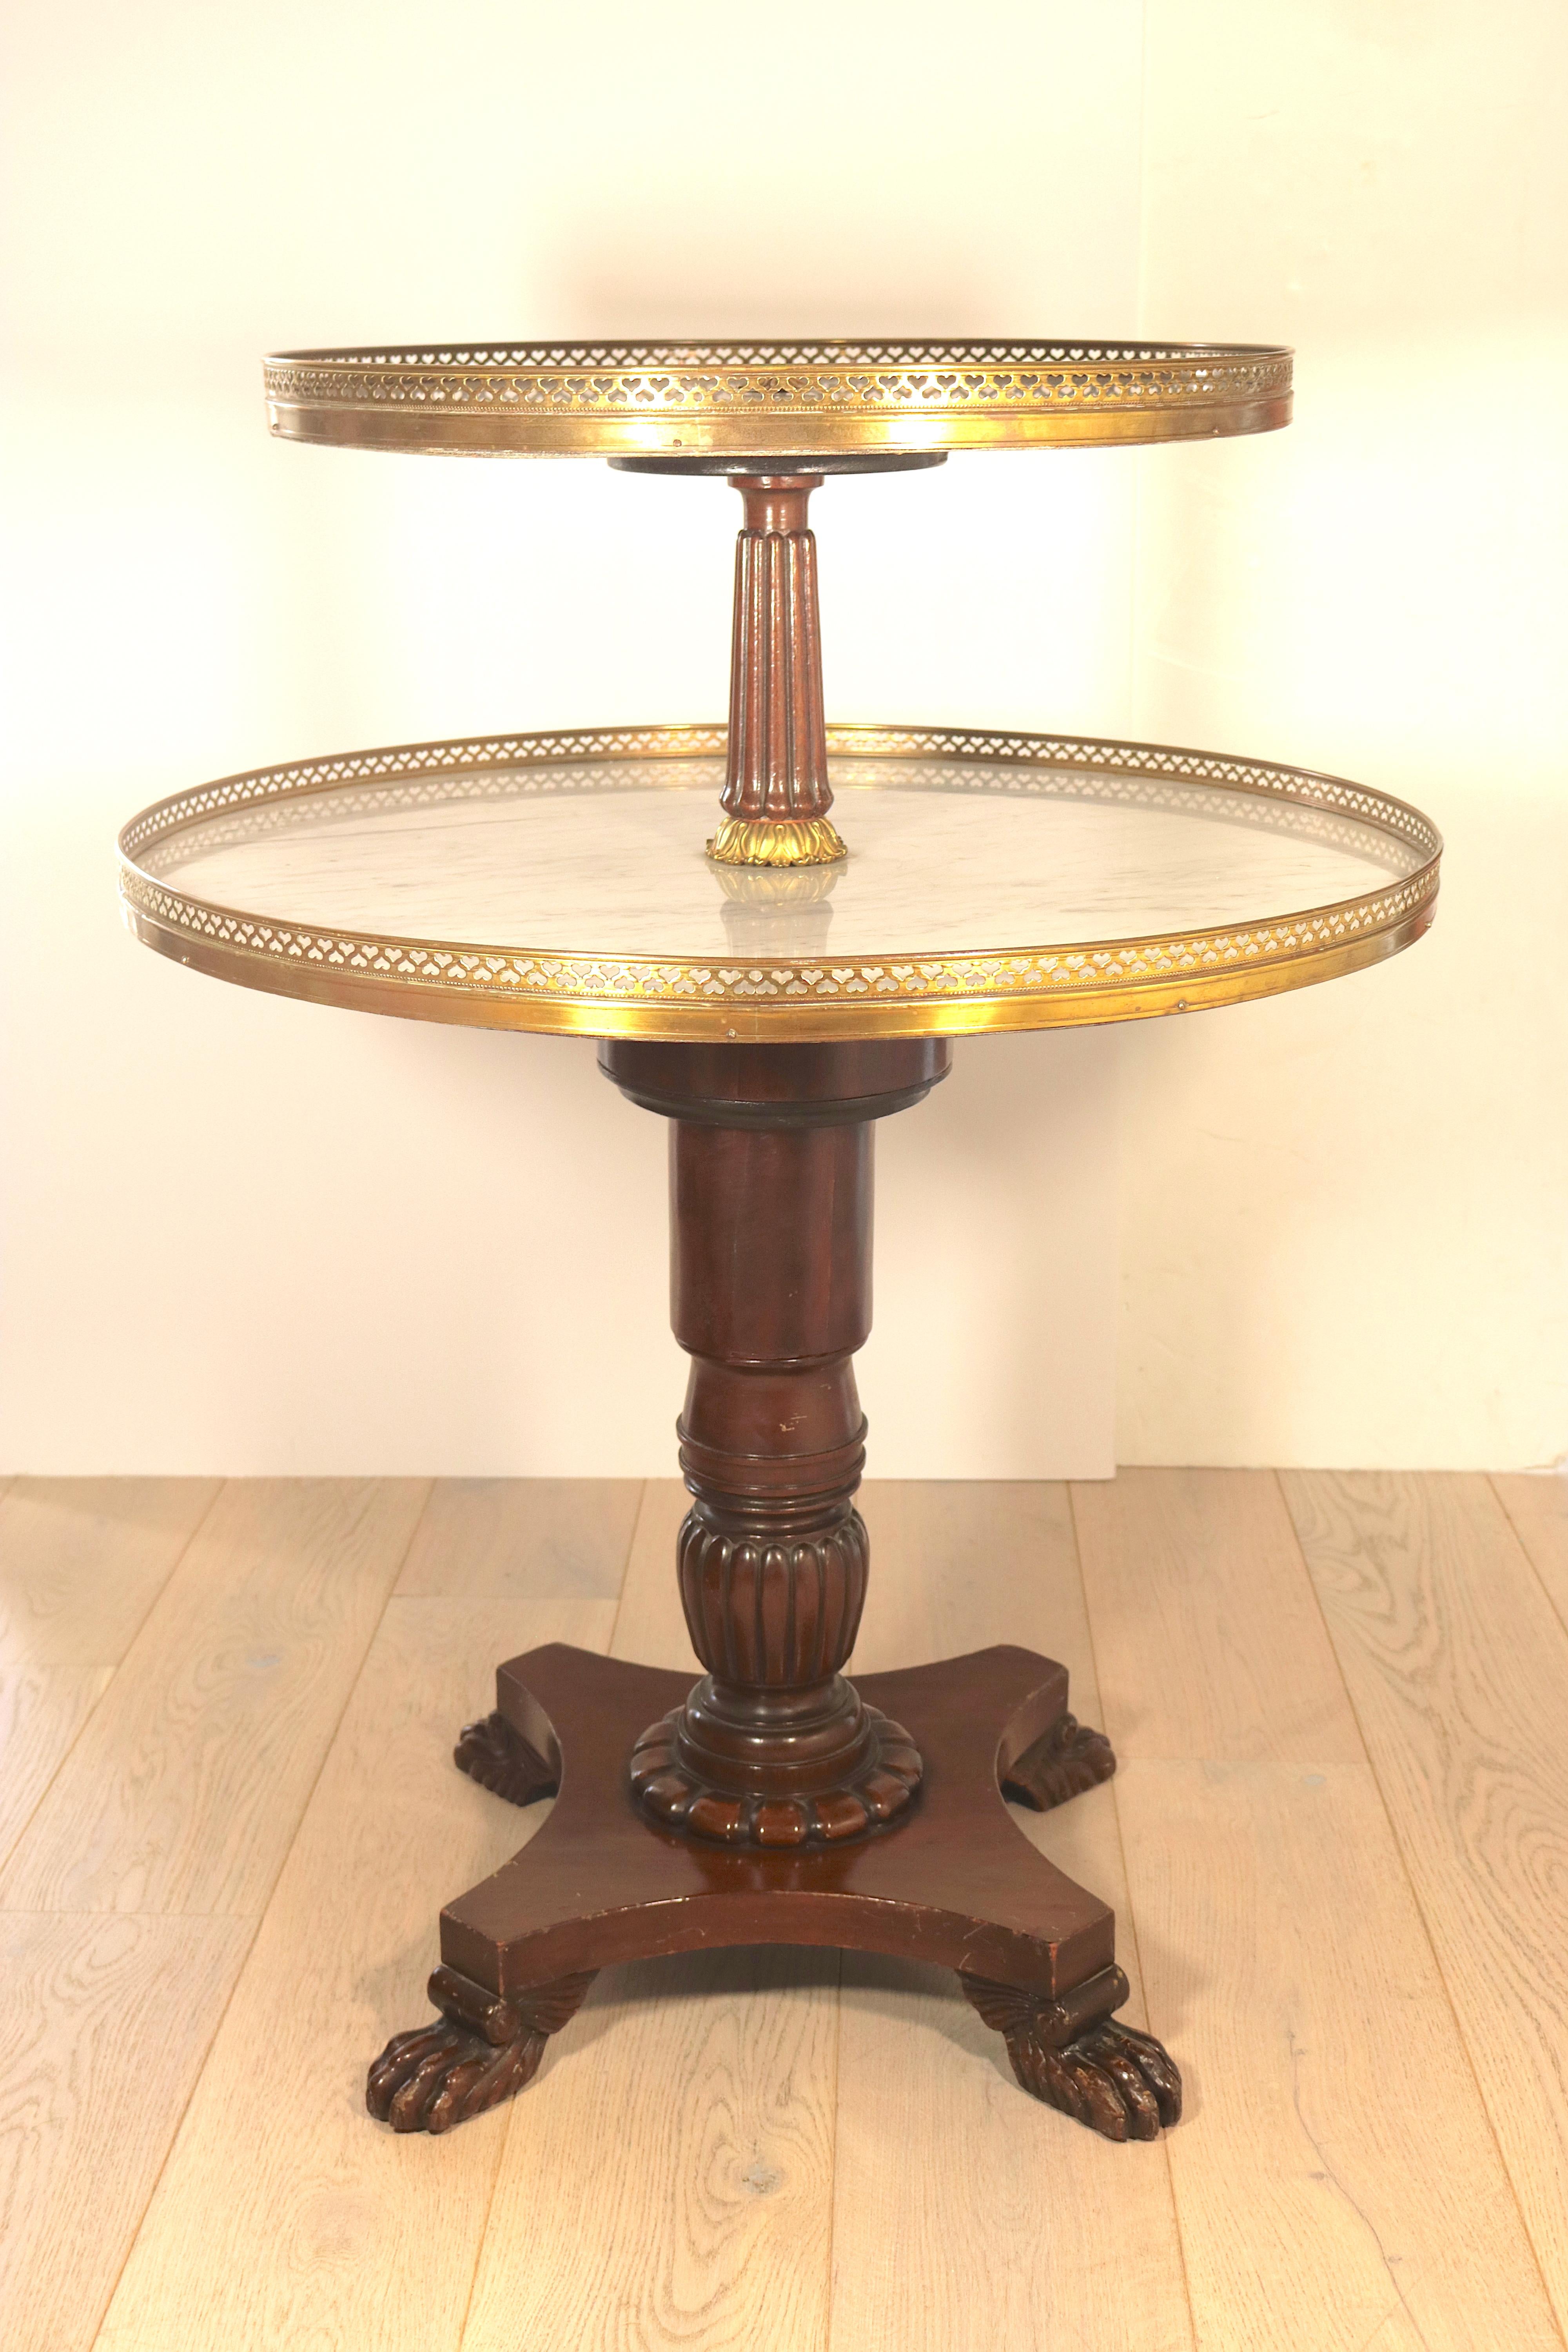 A most auspicious occasion deserves dessert served in Rothschild style!!
From a Socialite's table to your home.
Classical finely detailed mahogany brass-mounted two-tier dessert serving table-Dumb Waiter, swivel around for accessibility,
The round